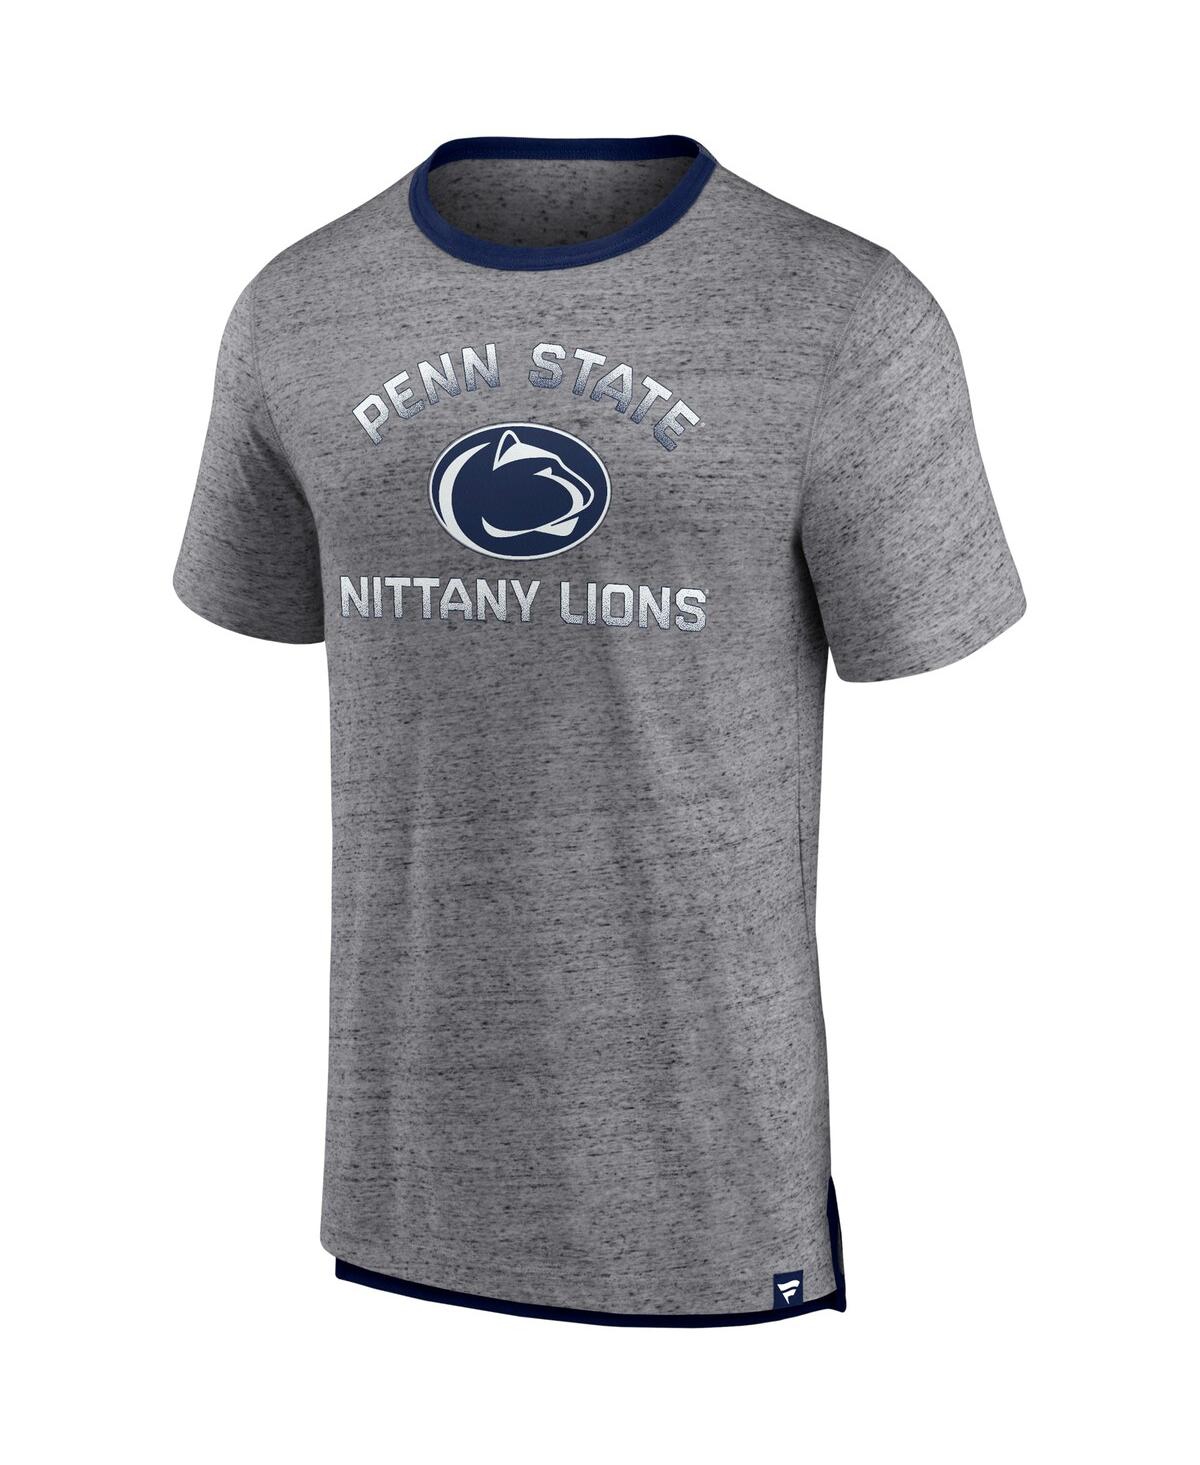 Shop Fanatics Men's  Heathered Gray Penn State Nittany Lions Personal Record T-shirt